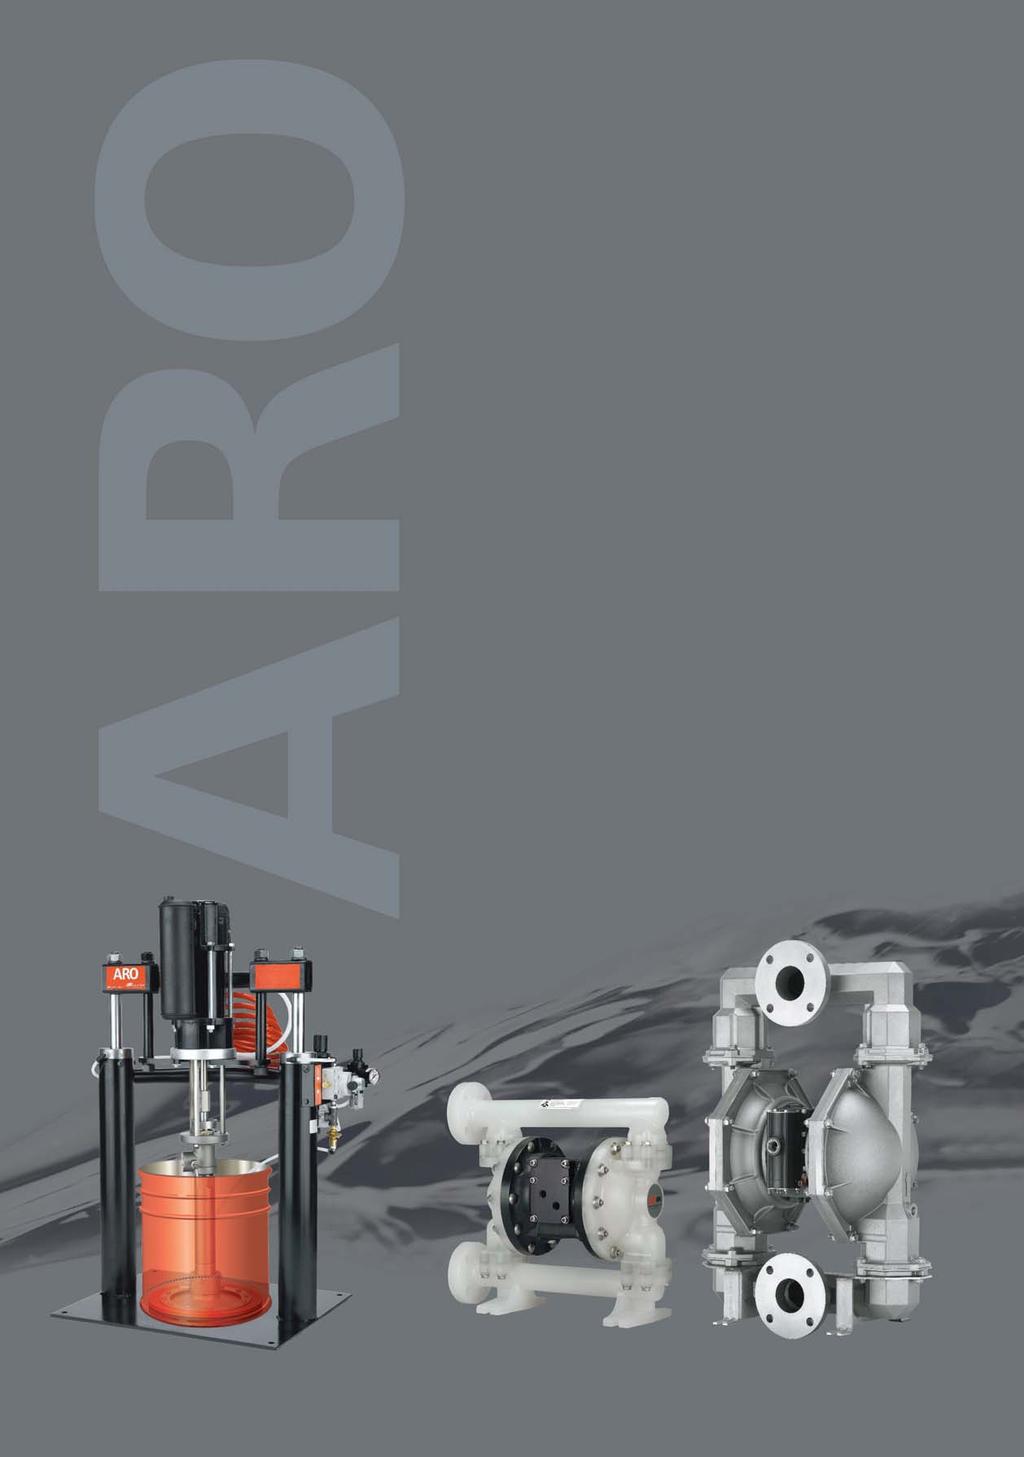 The pump professionals Leader in pneumatic pumps, ARO offers a wide range of diaphragms and piston pumps for low to high viscosity fluids.